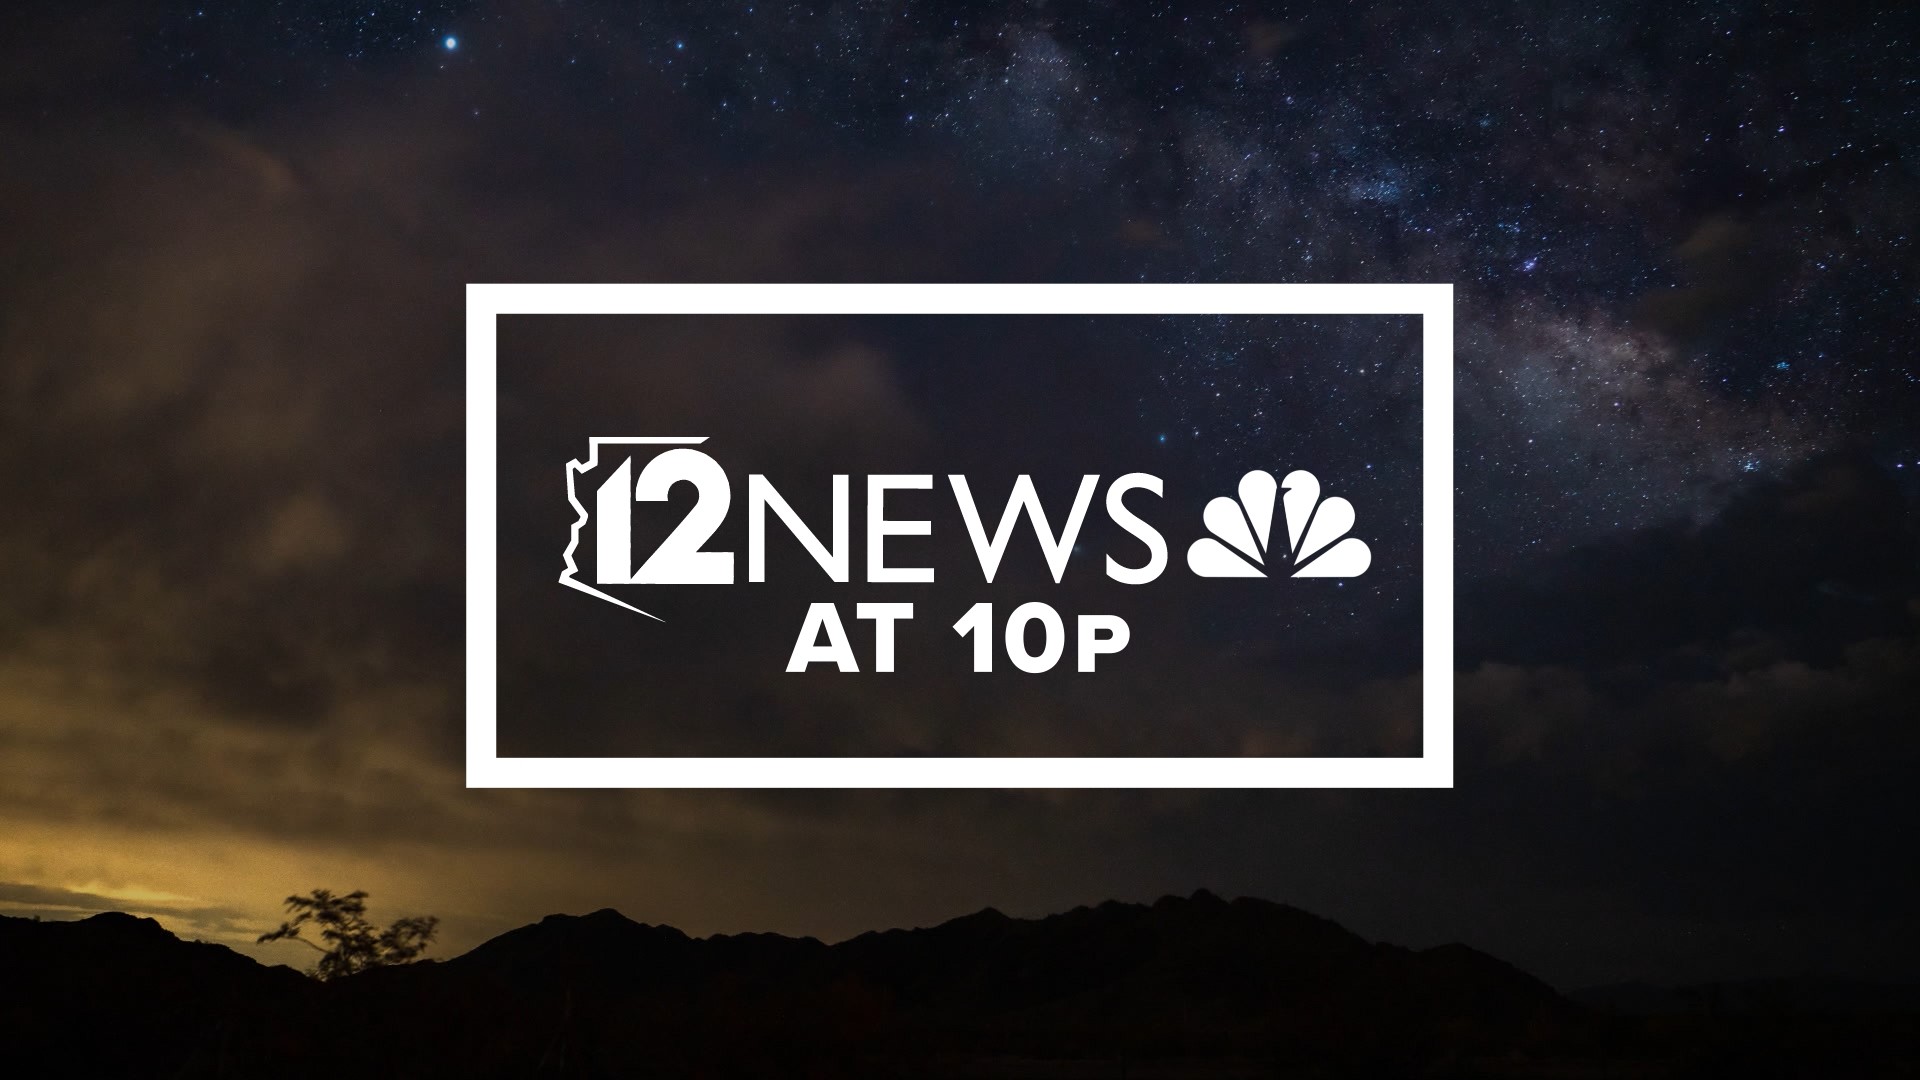 12 News at 10 lets you find out what happened today with great storytelling and incisive reporting.